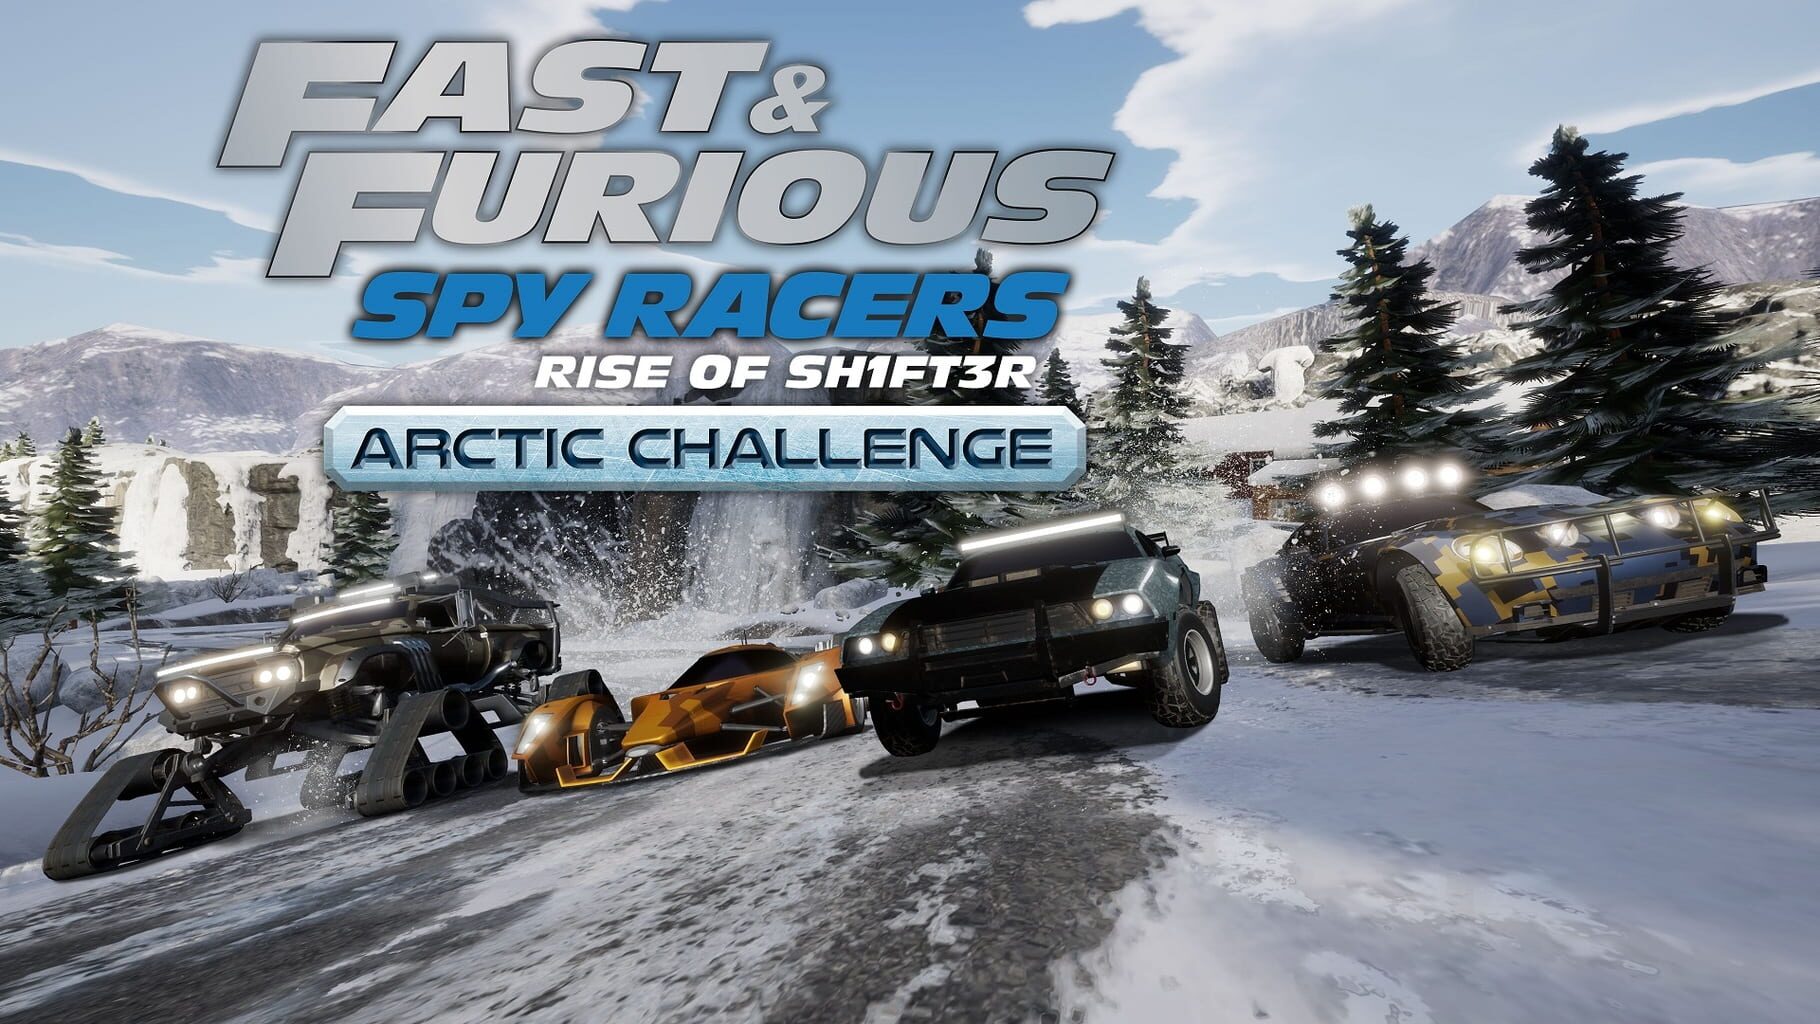 Fast & Furious: Spy Racers Rise of Sh1ft3r - Arctic Challenge artwork